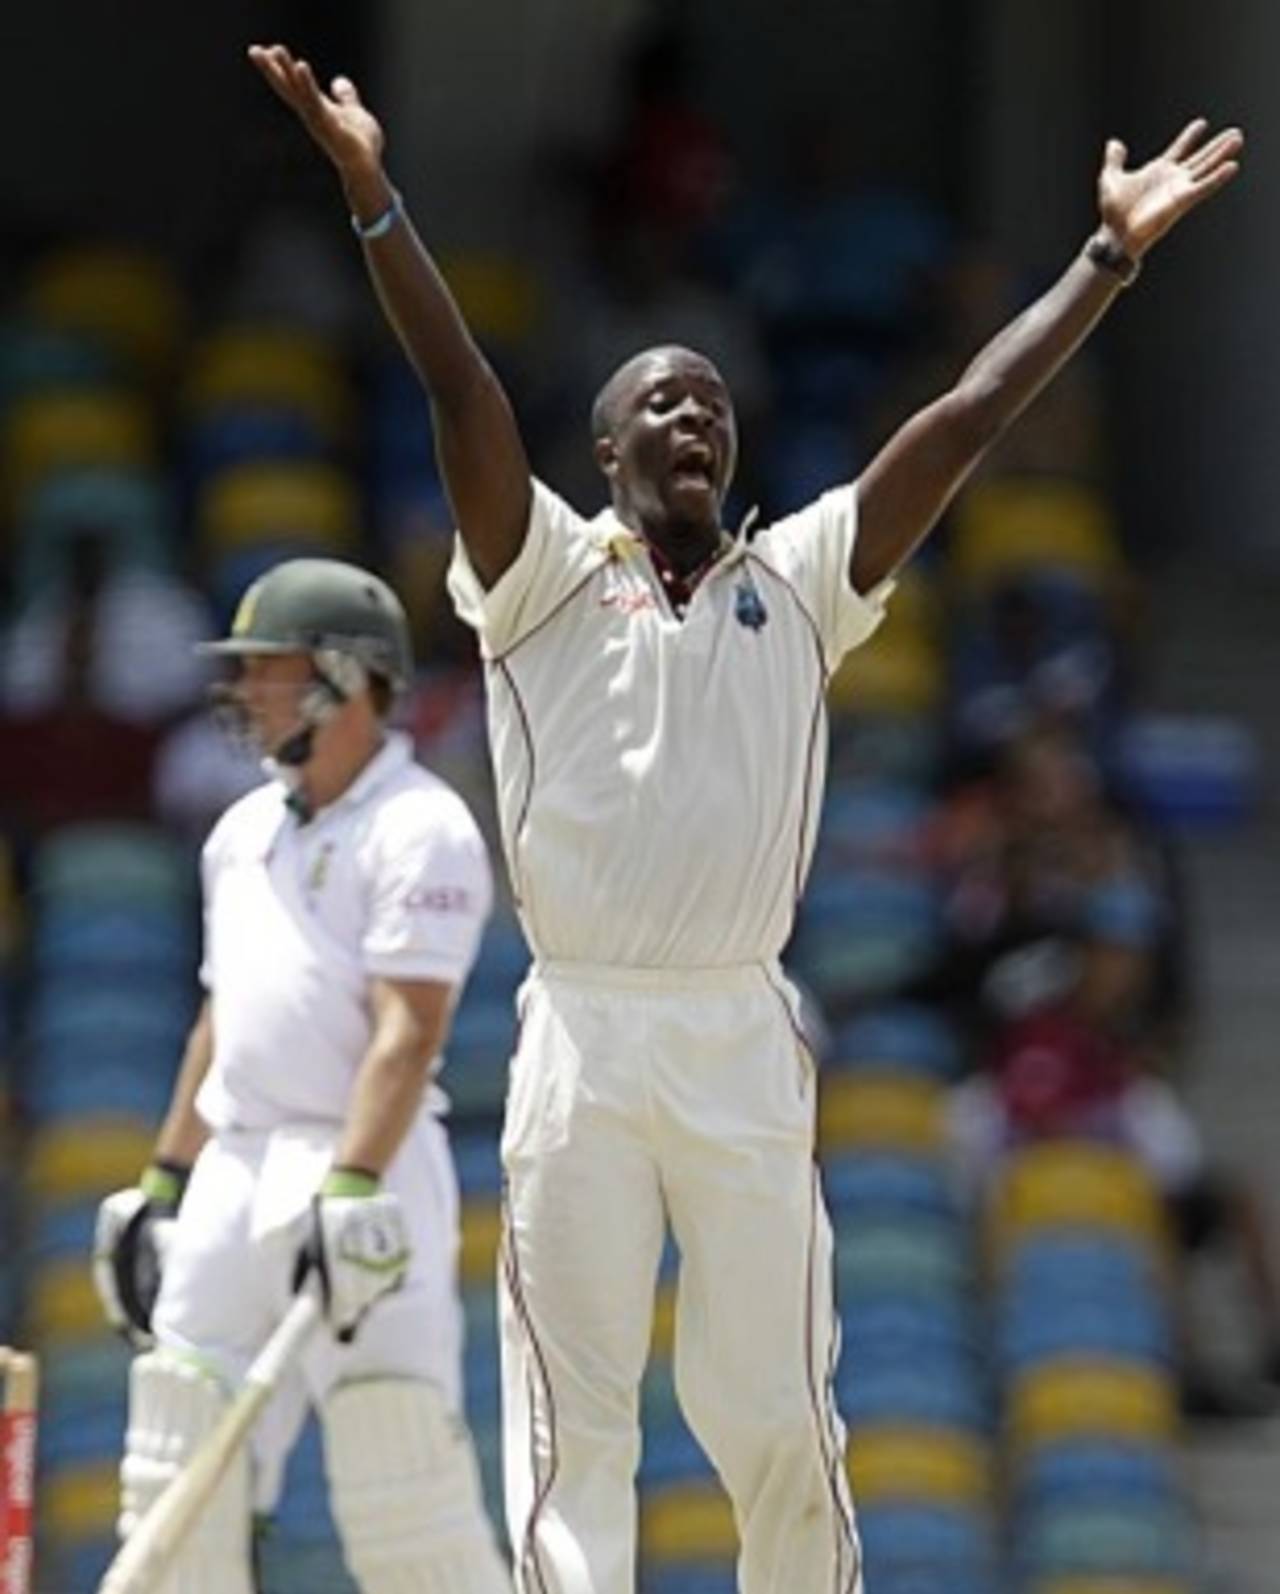 Kemar Roach appeals unsuccessfully against AB de Villiers, West Indies v South Africa, 3rd Test, Barbados, 2nd day, June 27, 2010